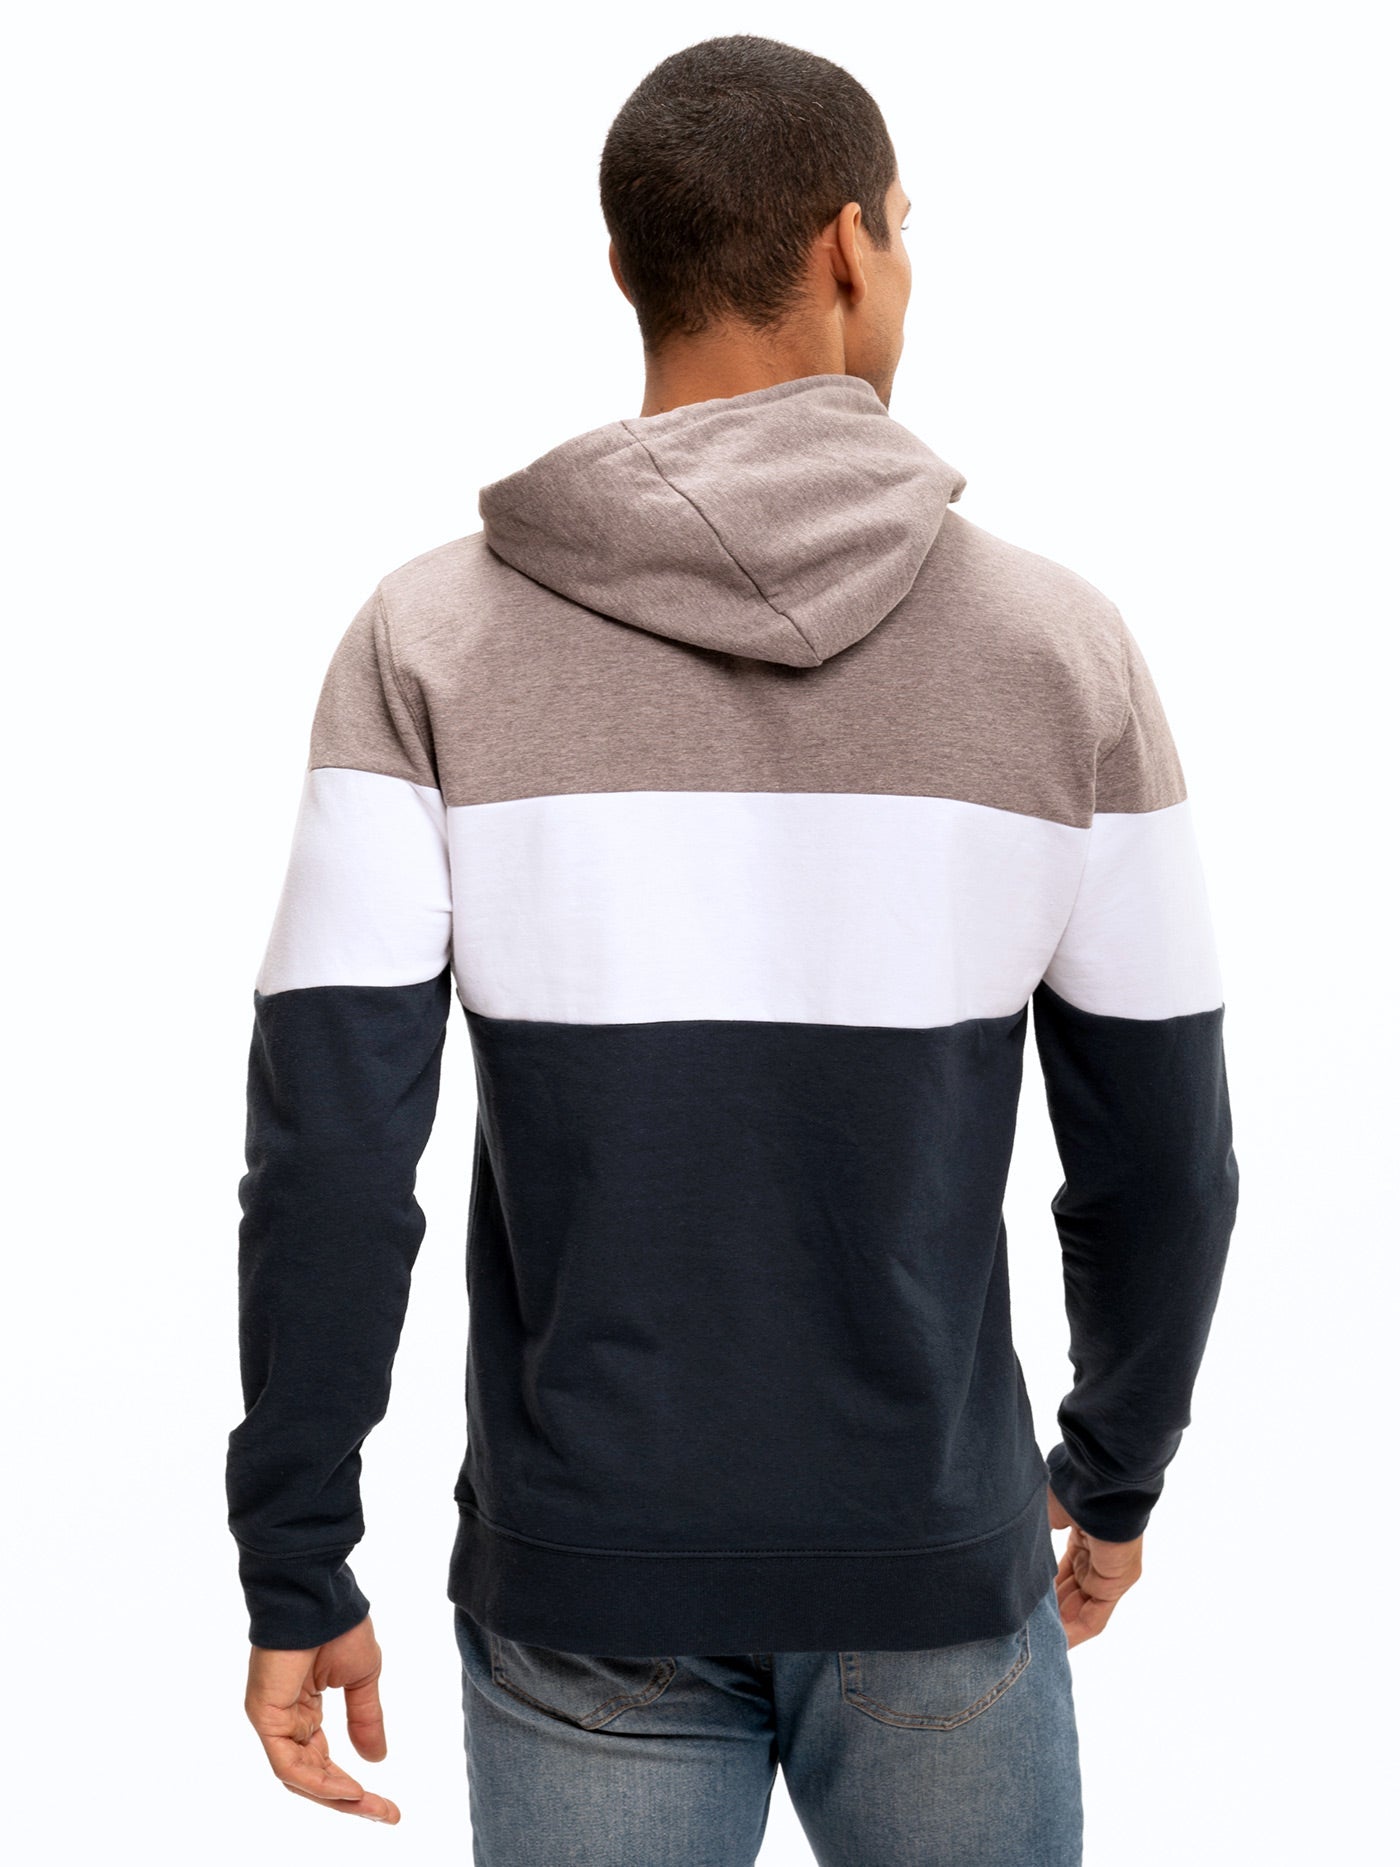 Romero Colorblock Pullover Hoodie Mens Outerwear Sweatshirt Threads 4 Thought 